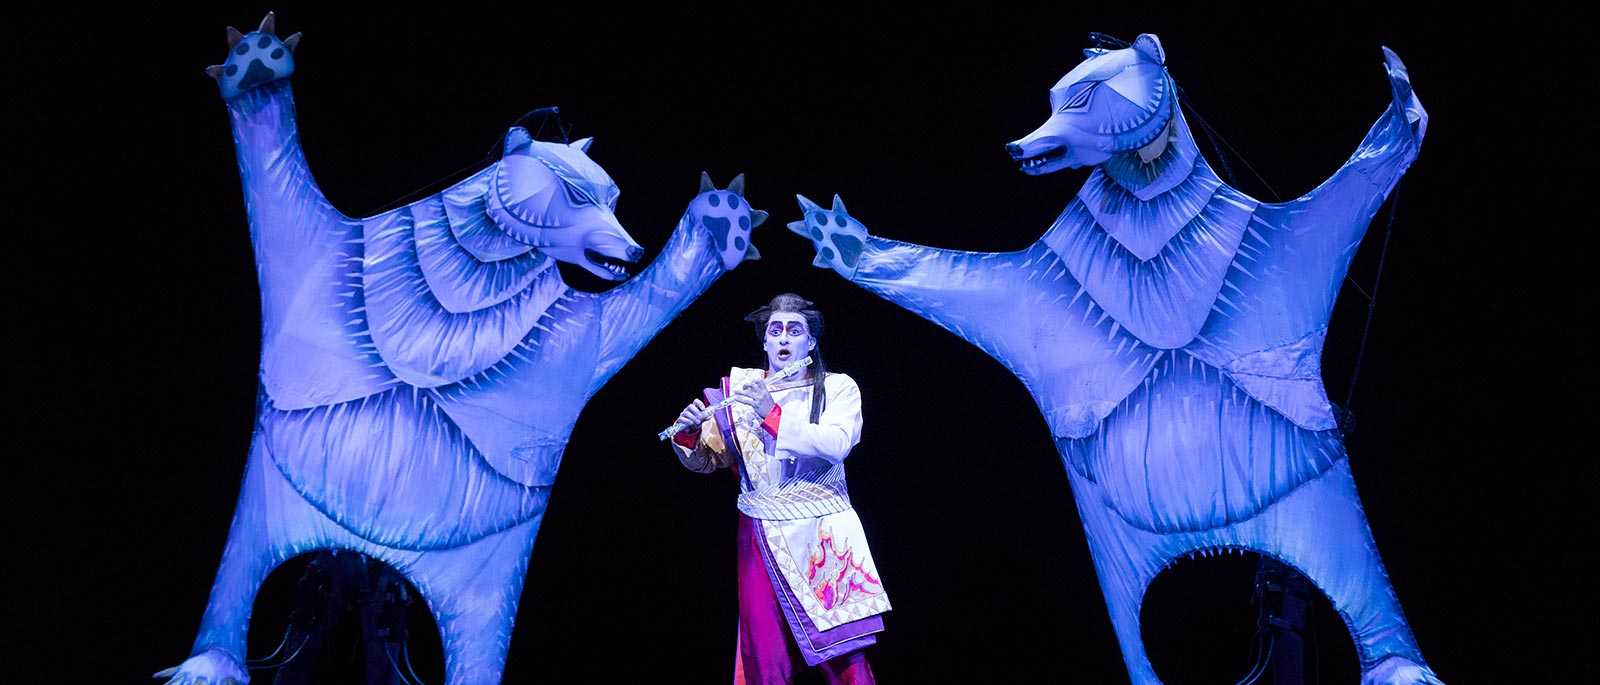 Tamino tames some bears with his Magic Flute, in Julie Taymor’s production of The Magic Flute at the Metropolitan Opera House